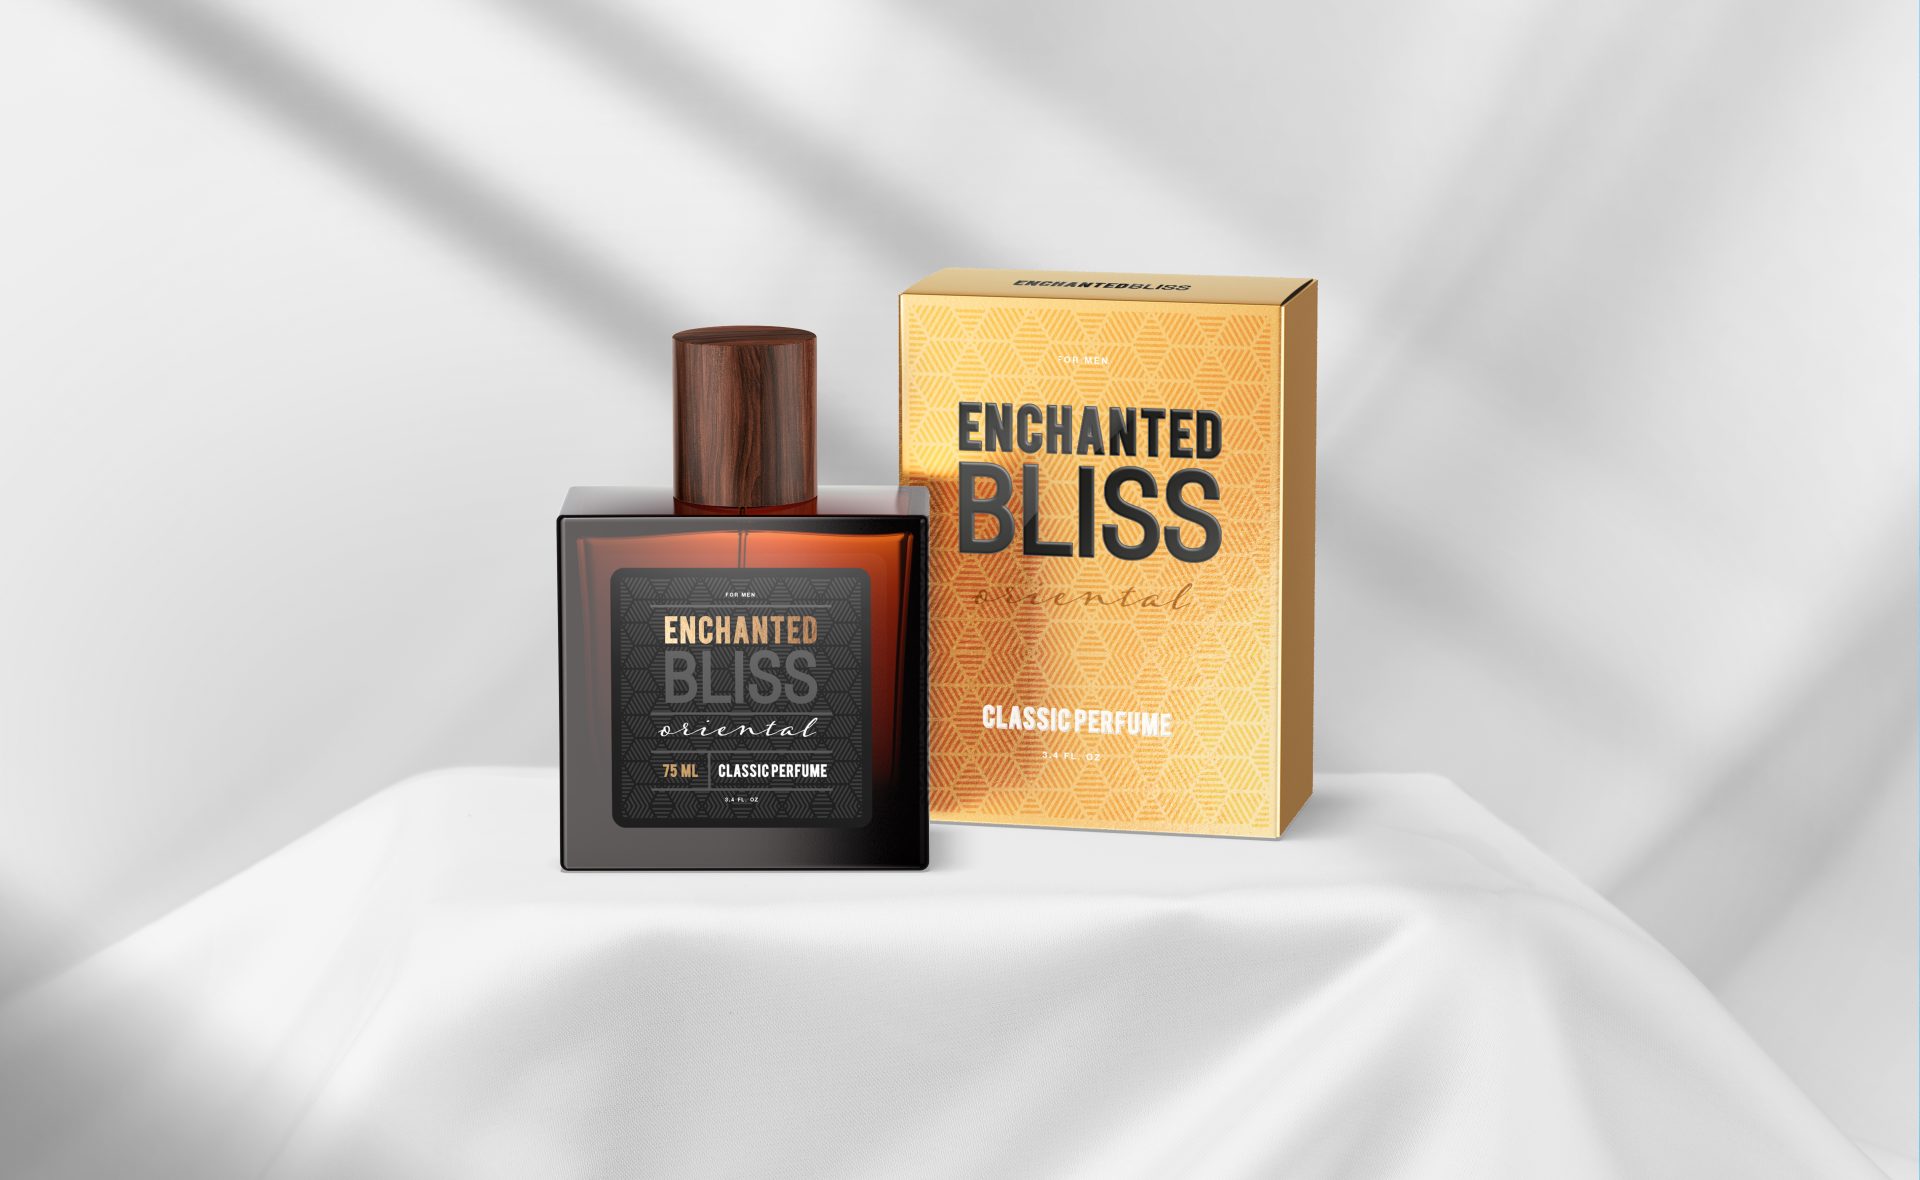 Enchanted Bliss – An original fragrance in a special edition. 5